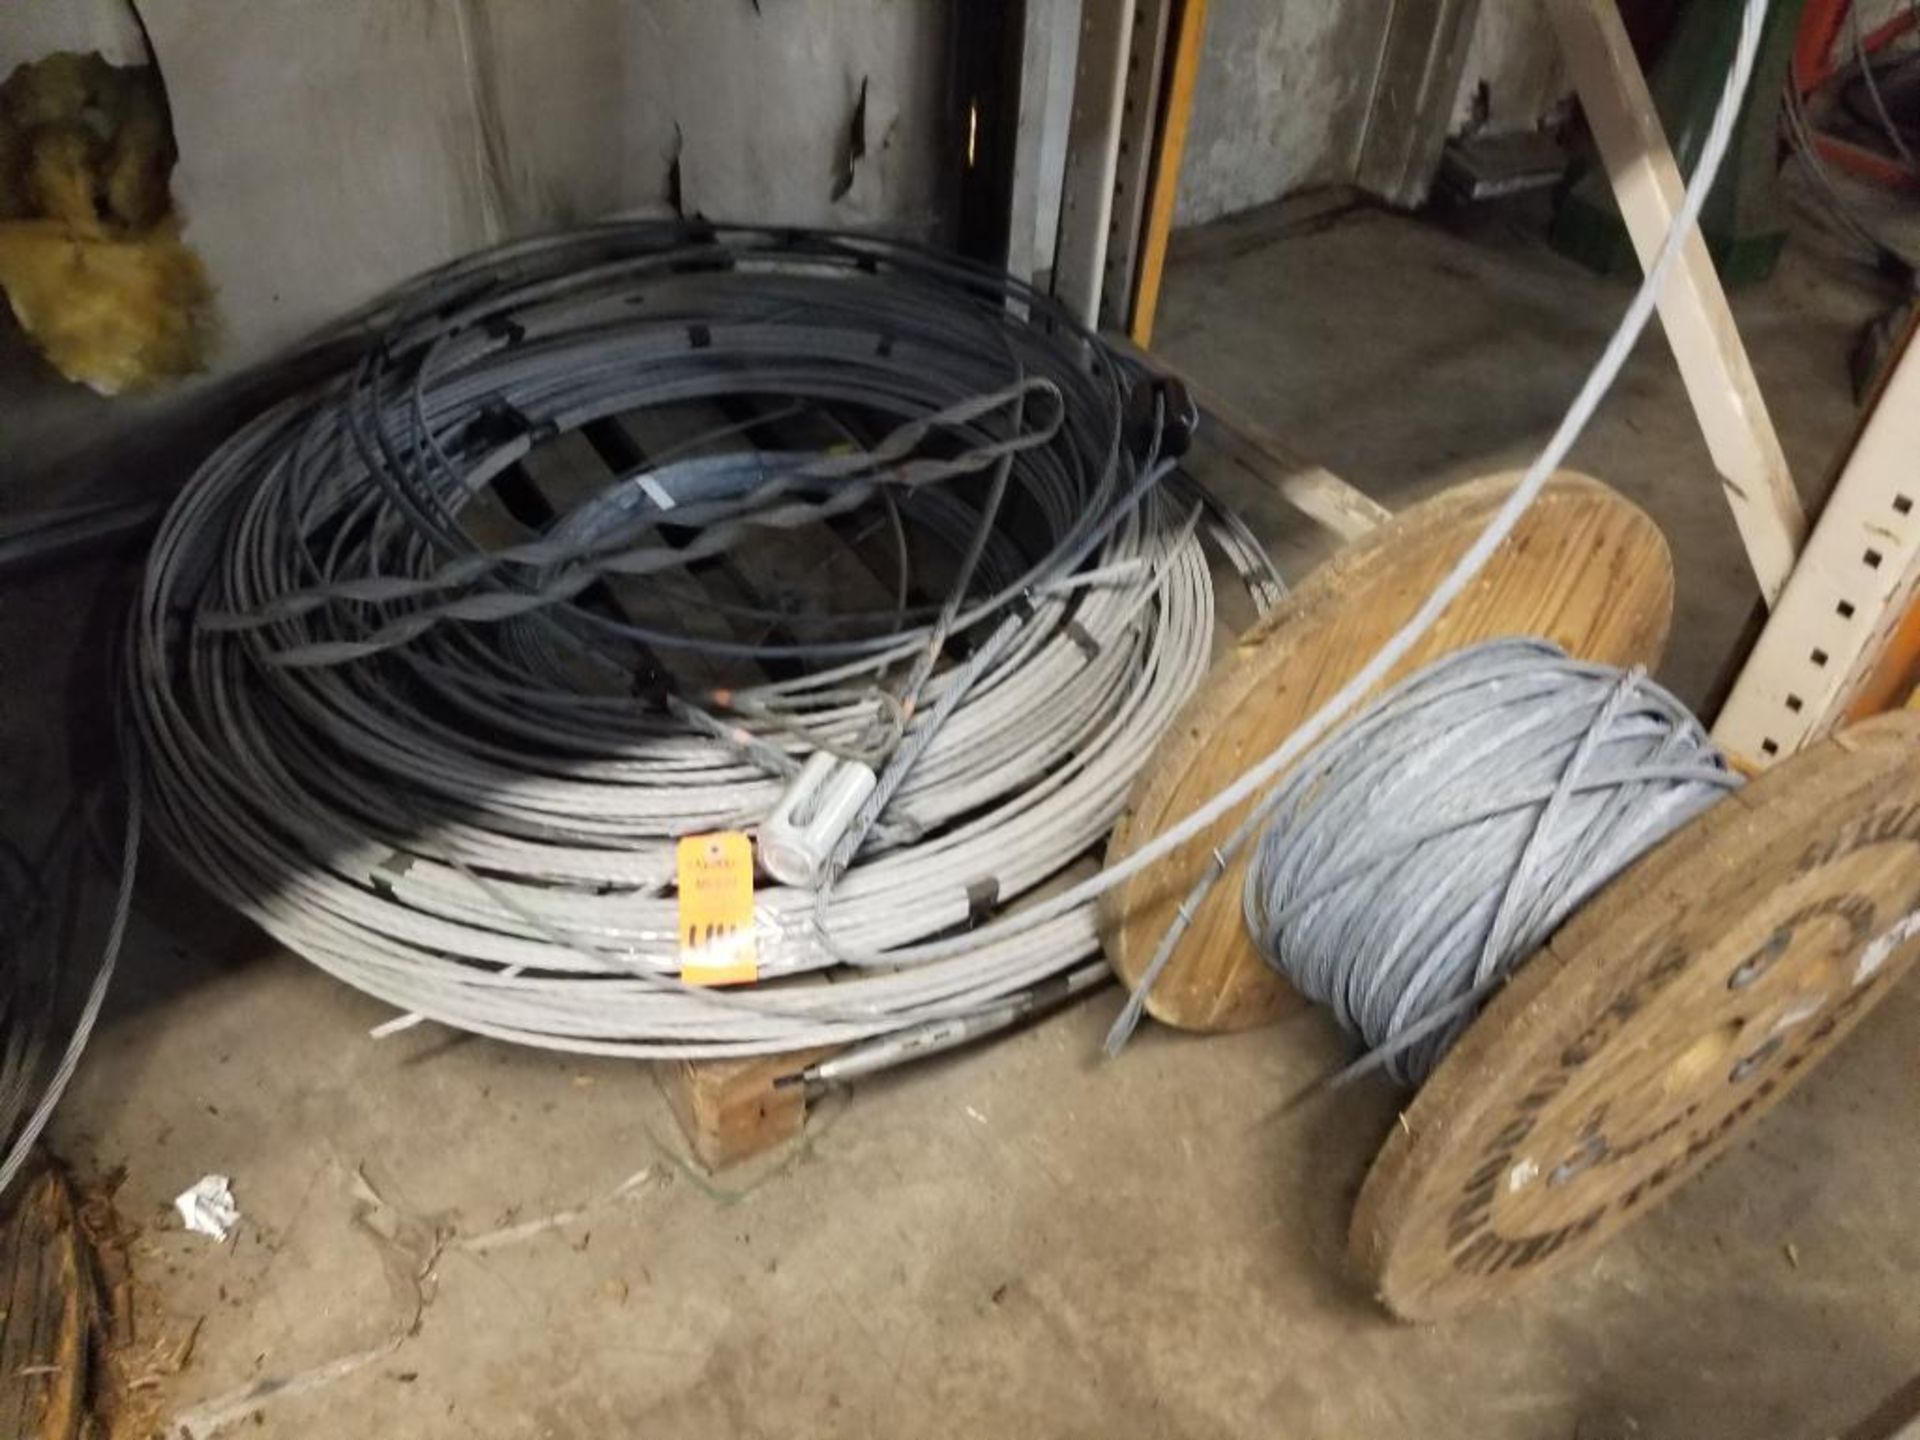 Pallet and Spool of bare wires.